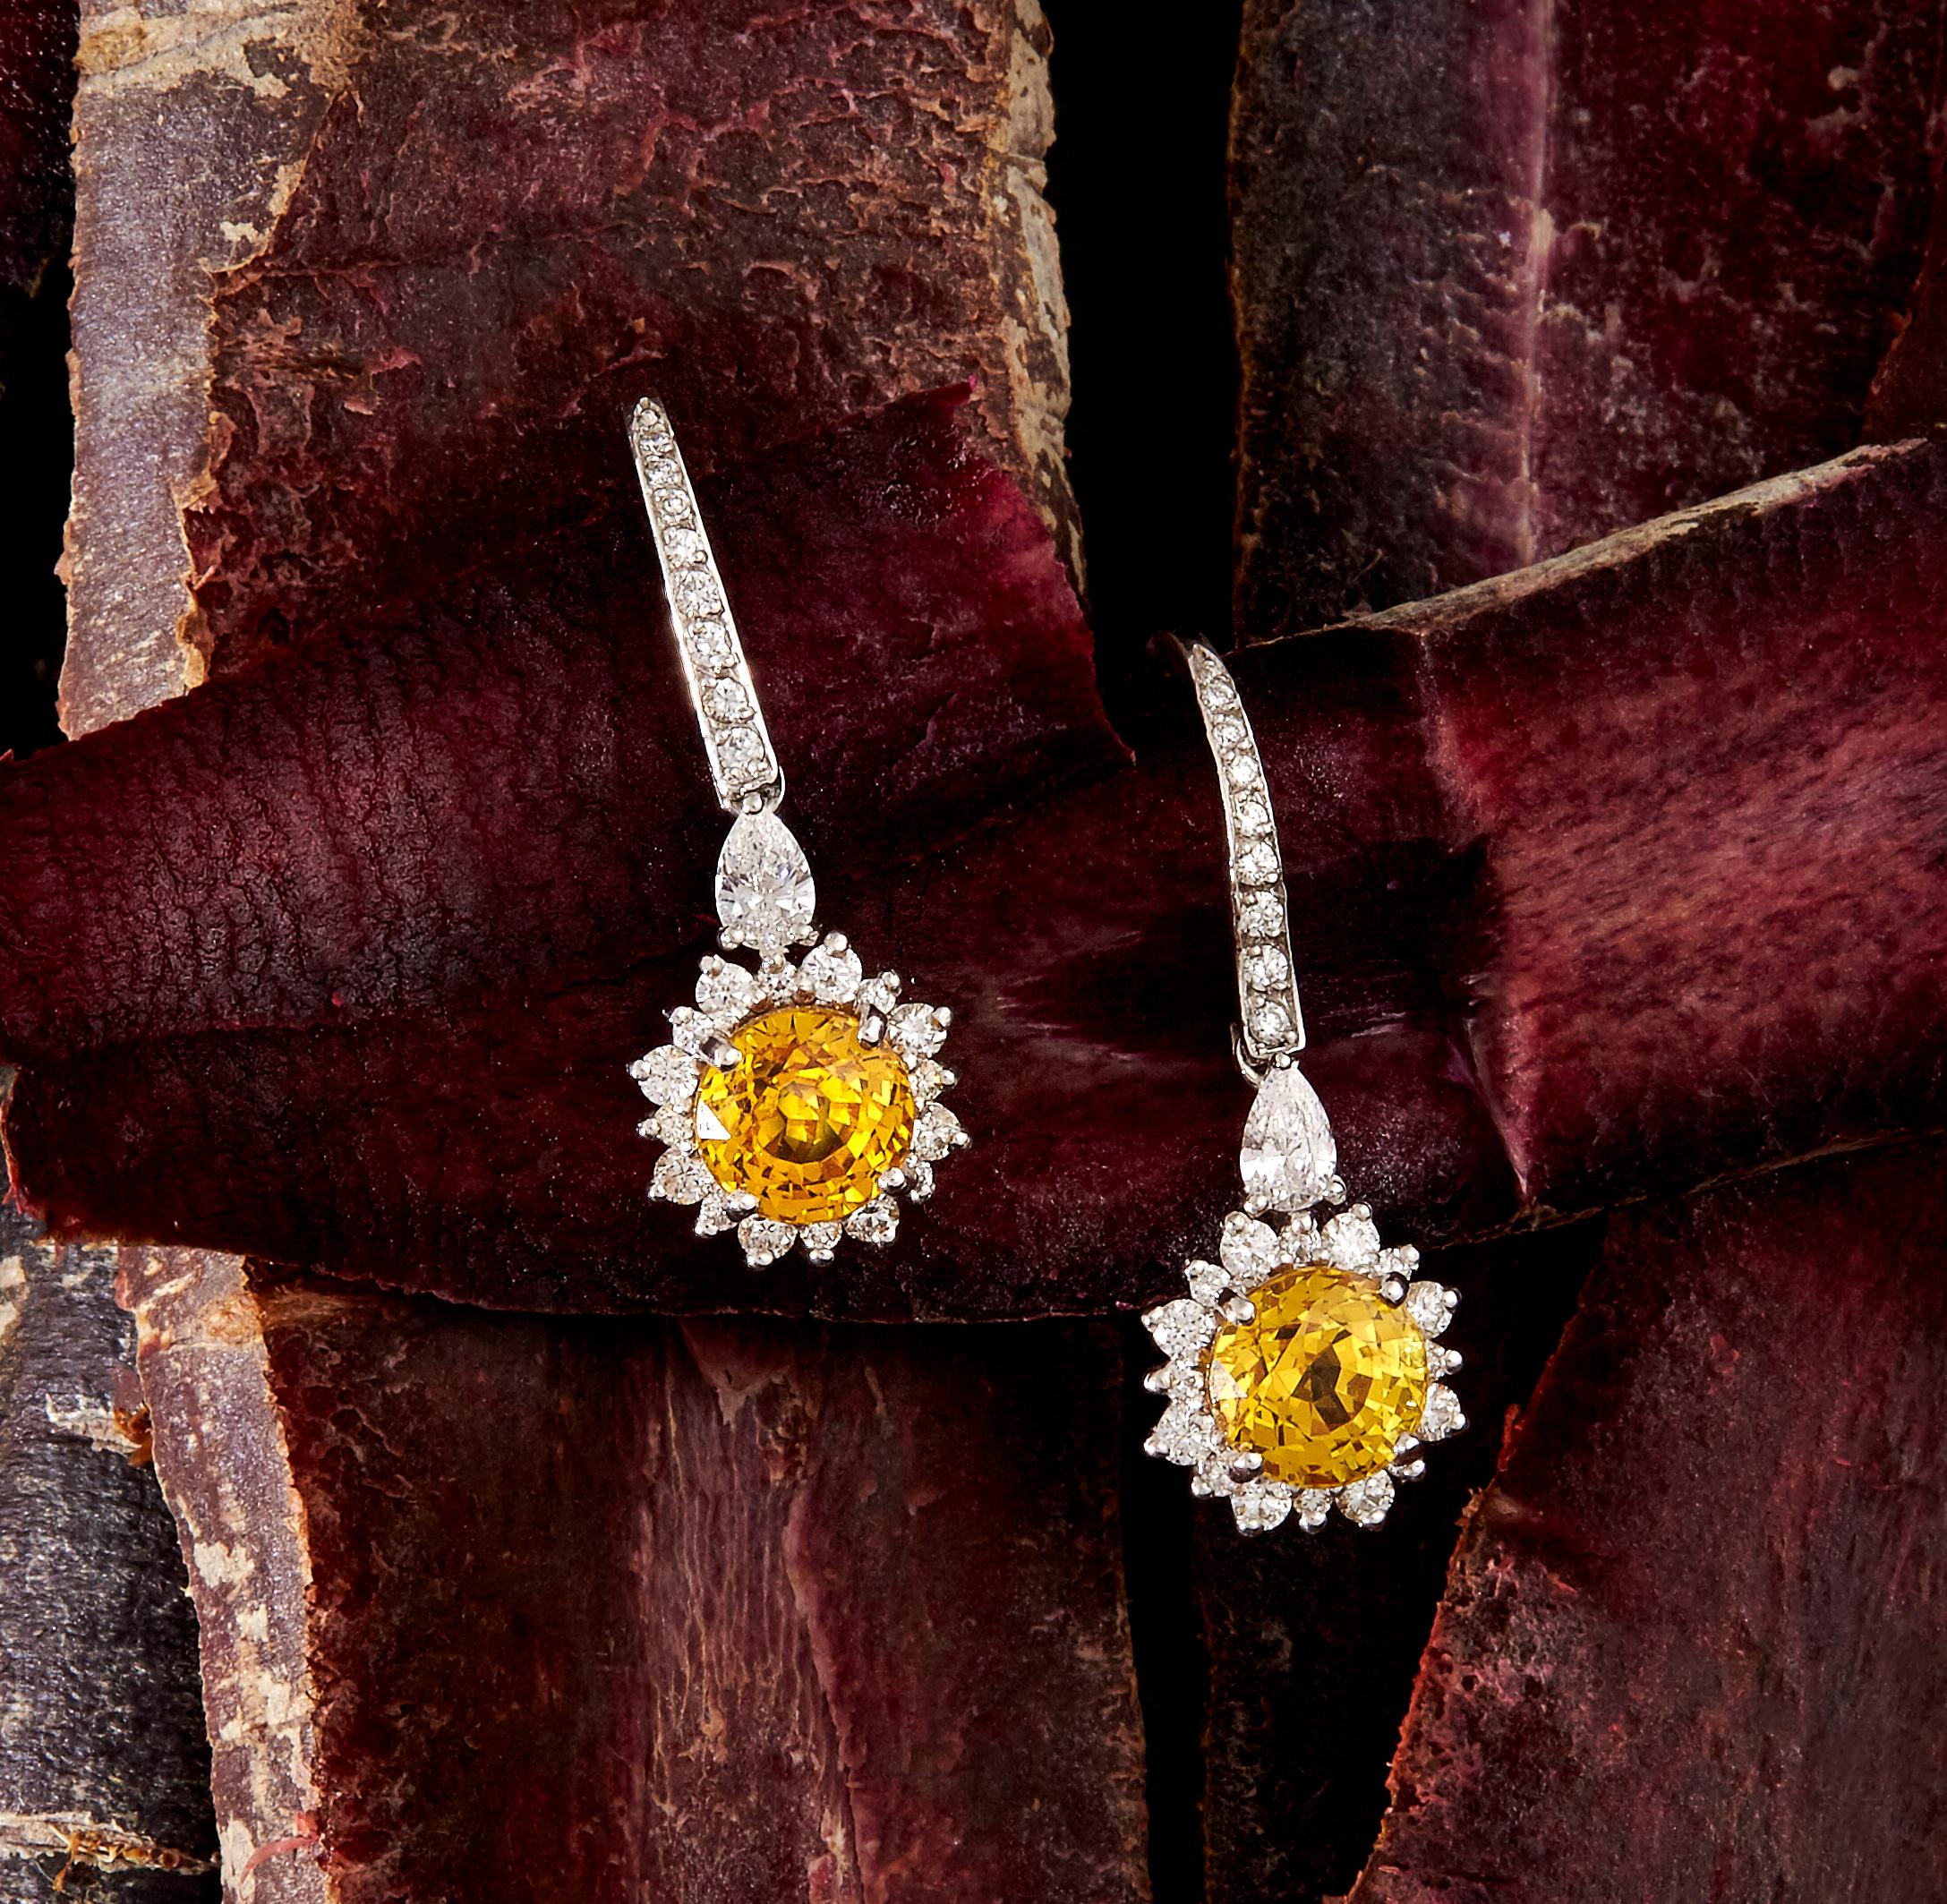 Matthew Ely 18 carat white gold drop earrings set with 2 round cut yellow sapphires amounting to 2.96ct. Surrounding the sapphires are two pear shaped diamonds of F color and VS-SI clarity that total 0.20ct, and 48 round diamonds of F color and VS